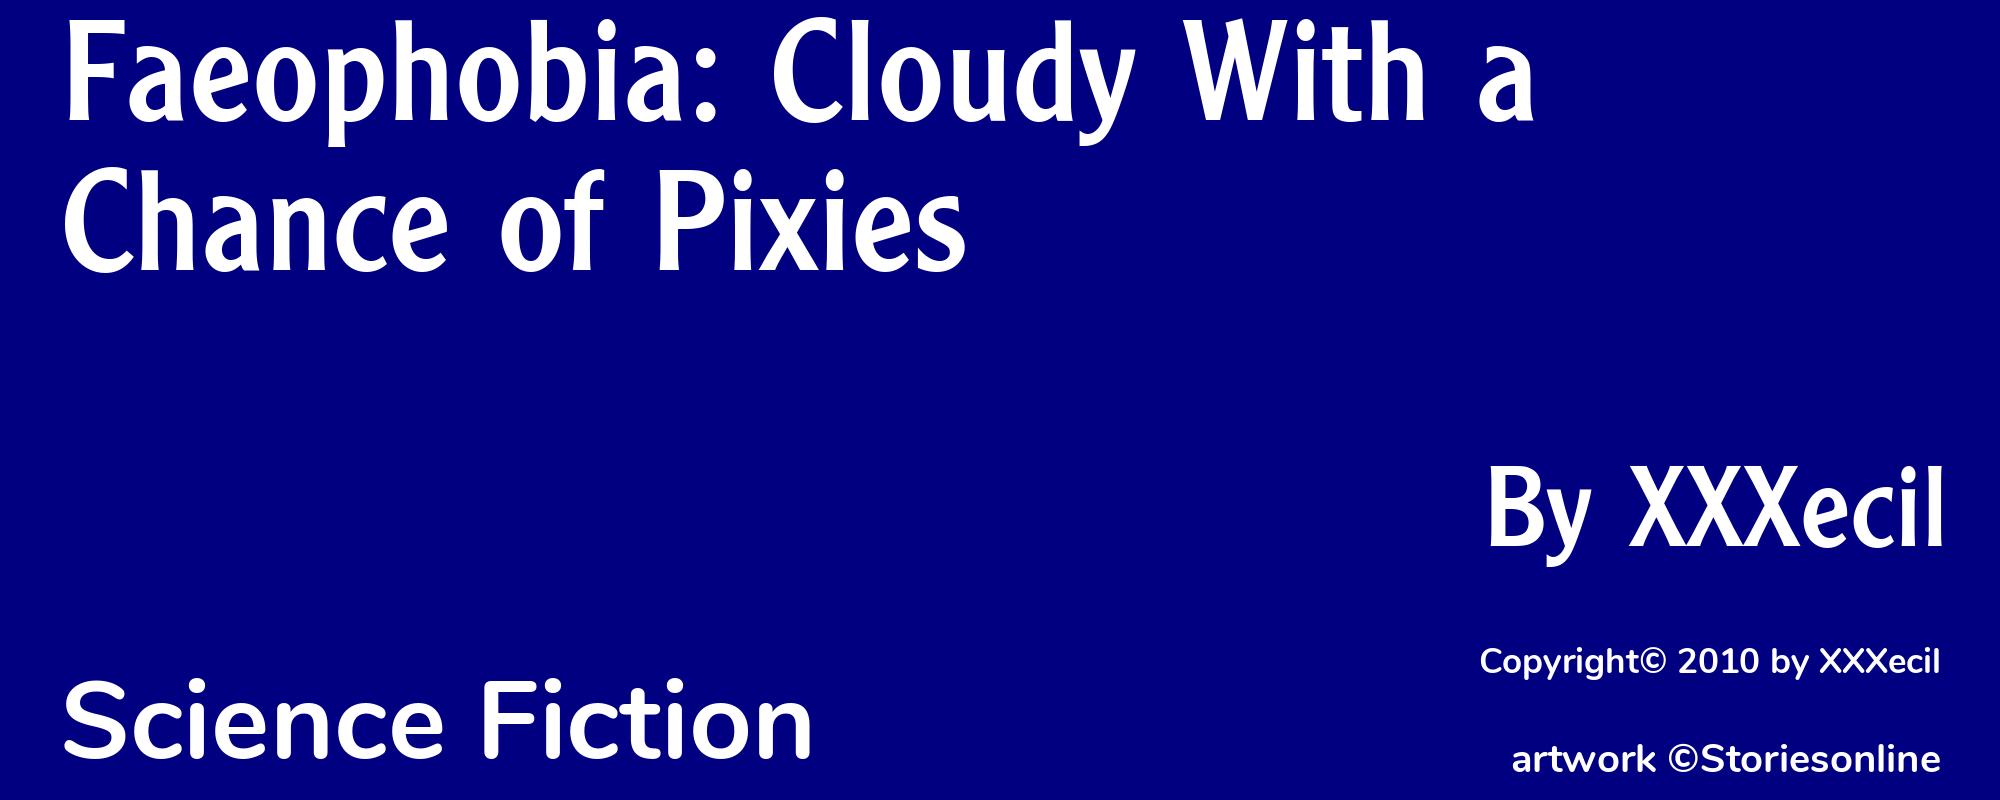 Faeophobia: Cloudy With a Chance of Pixies - Cover